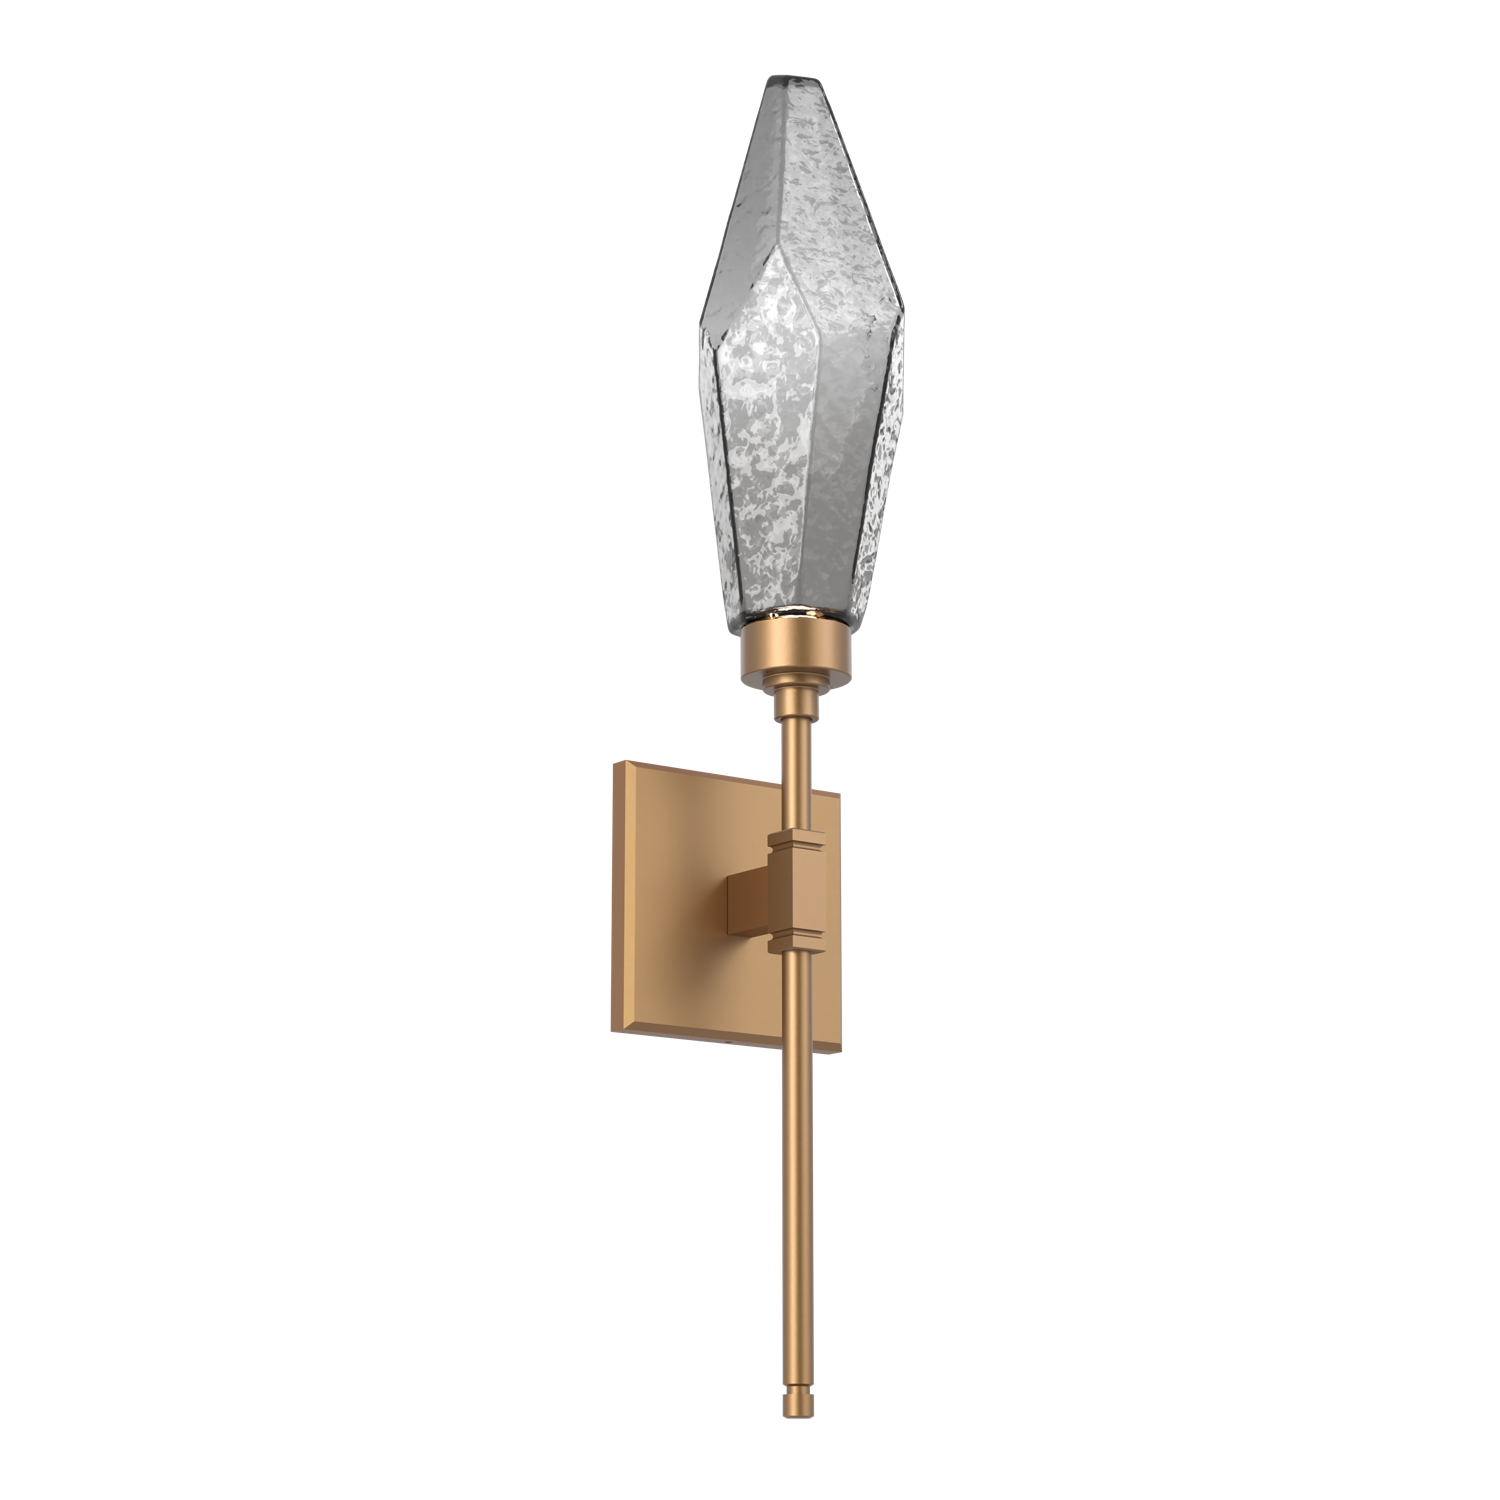 IDB0050-04-NB-CS-Hammerton-Studio-Rock-Crystal-ada-certified-belvedere-wall-sconce-with-novel-brass-finish-and-chilled-smoke-glass-shades-and-LED-lamping